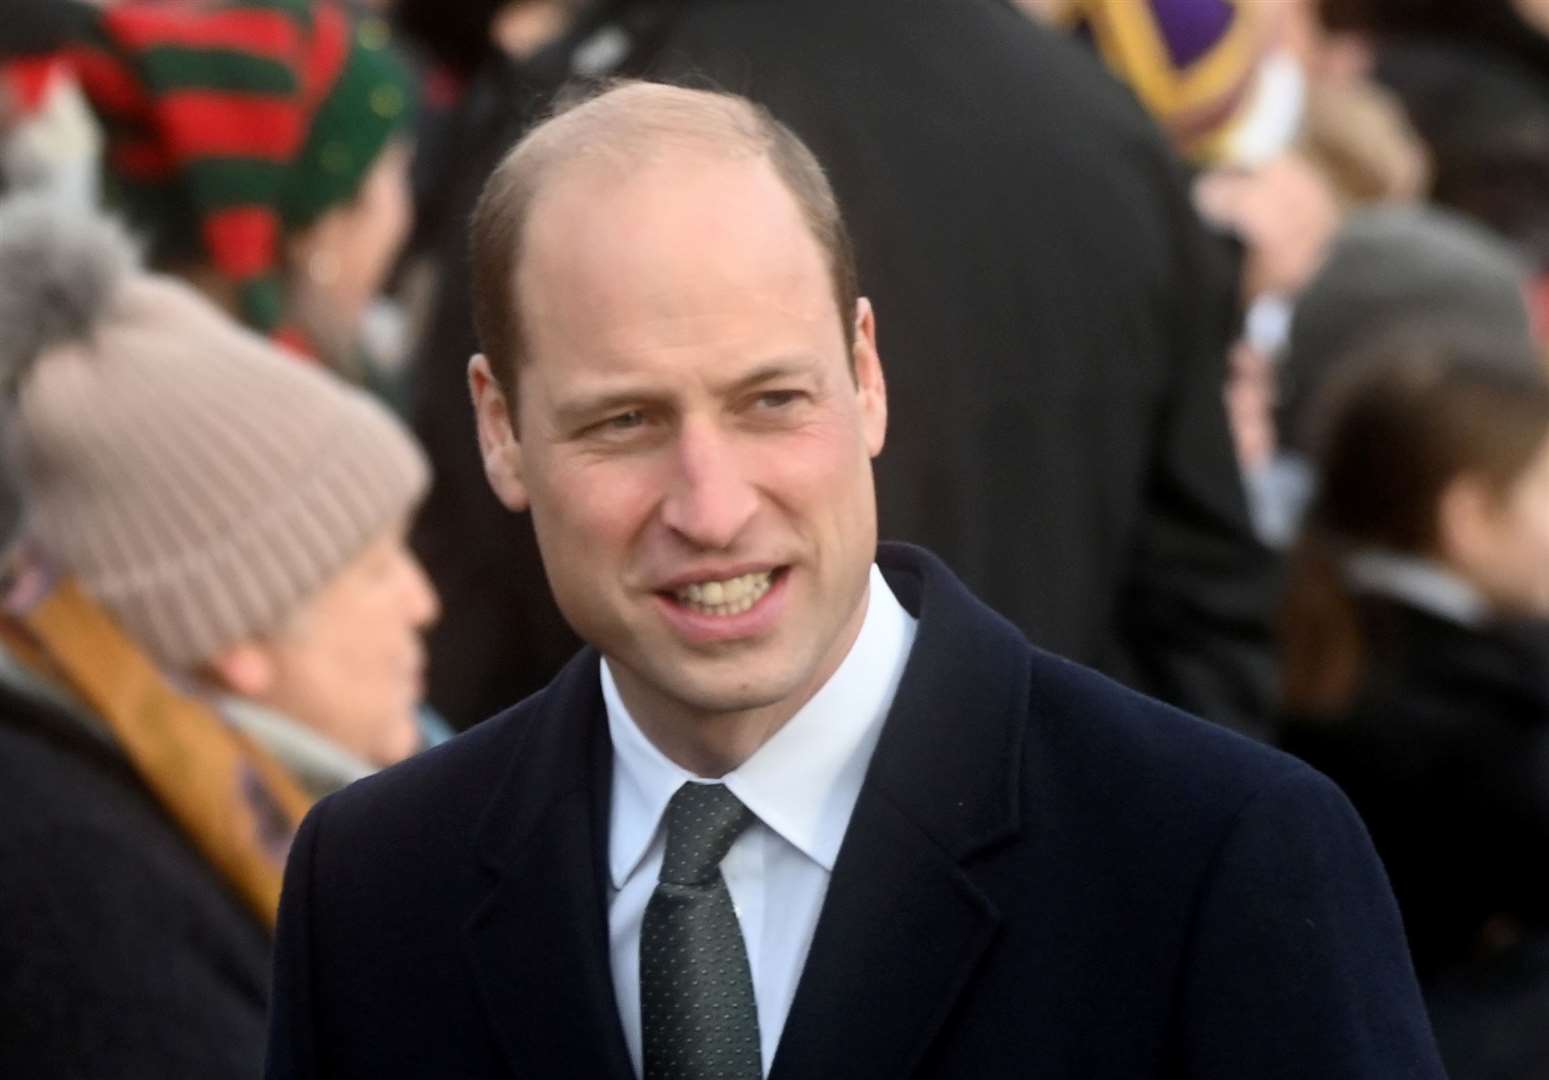 The Duchy of Cornwall is headed by Prince William